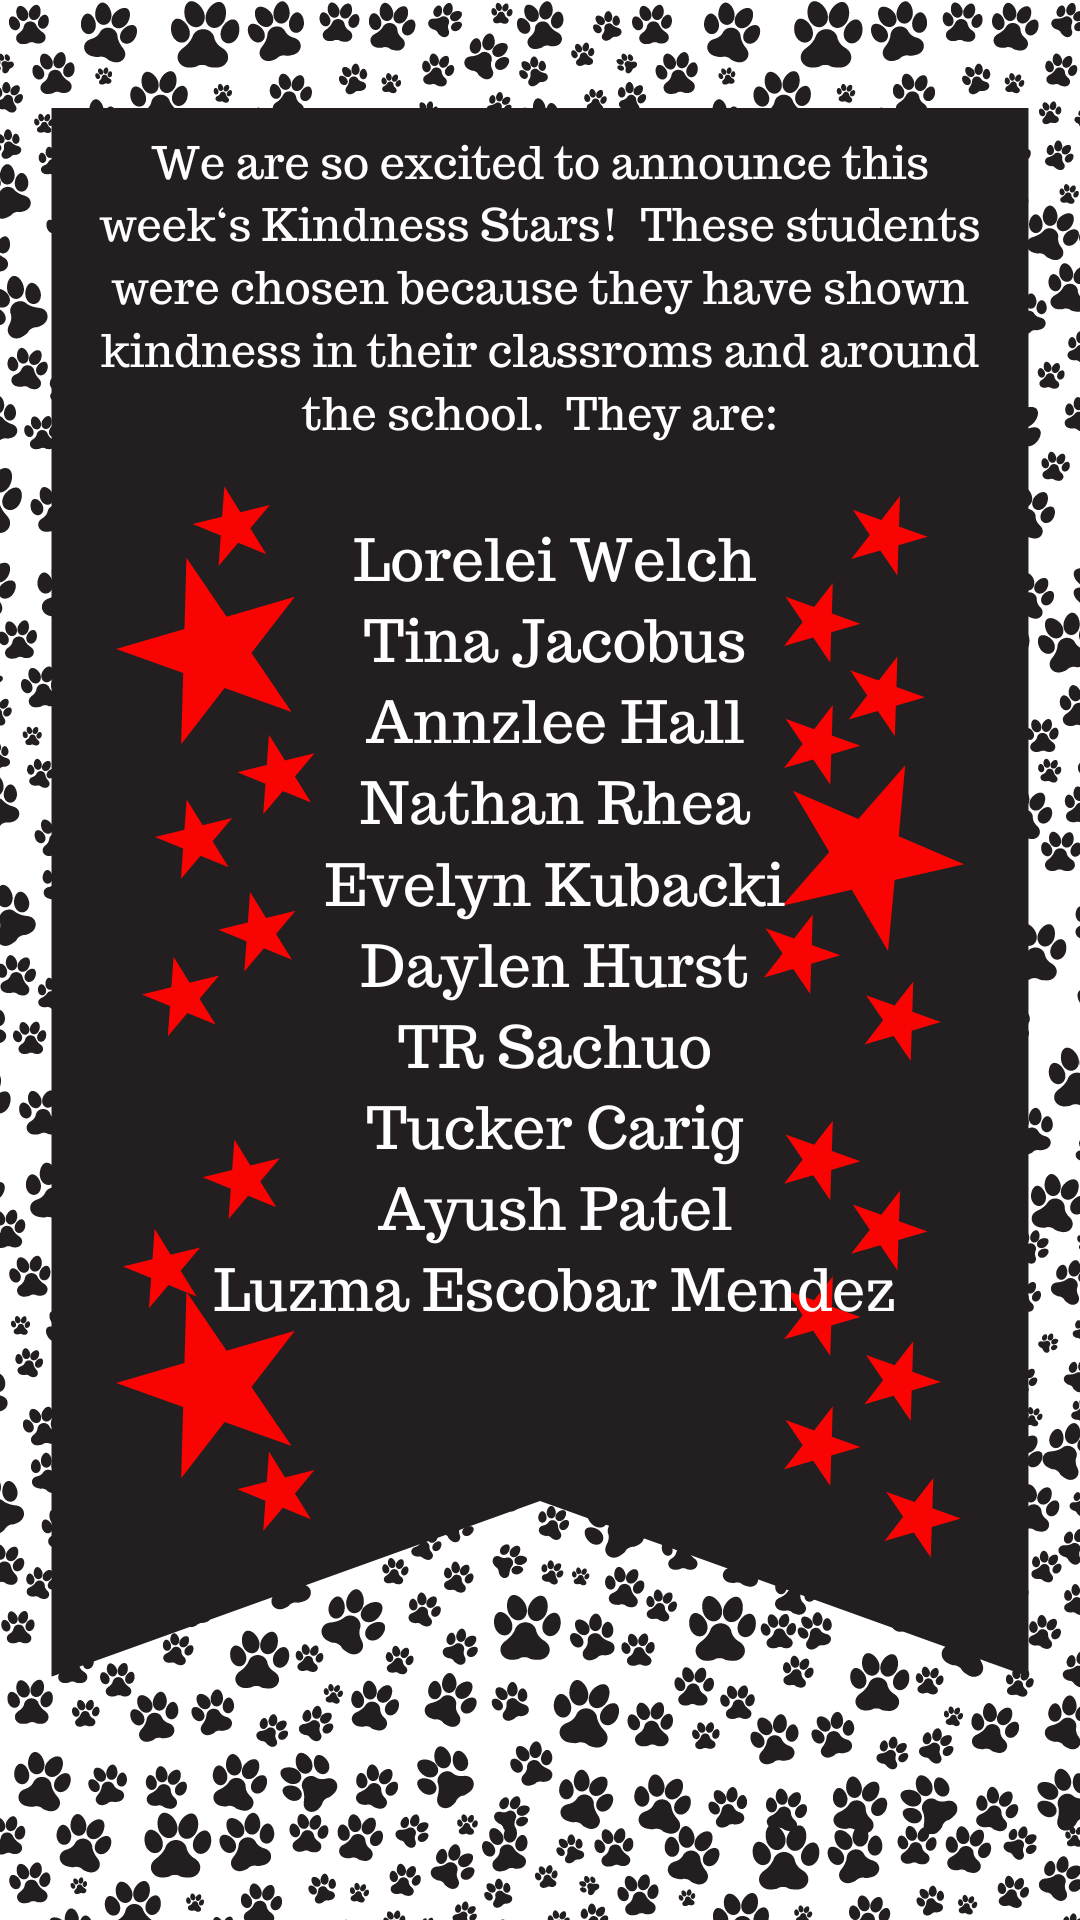 Kindness Stars of the Week